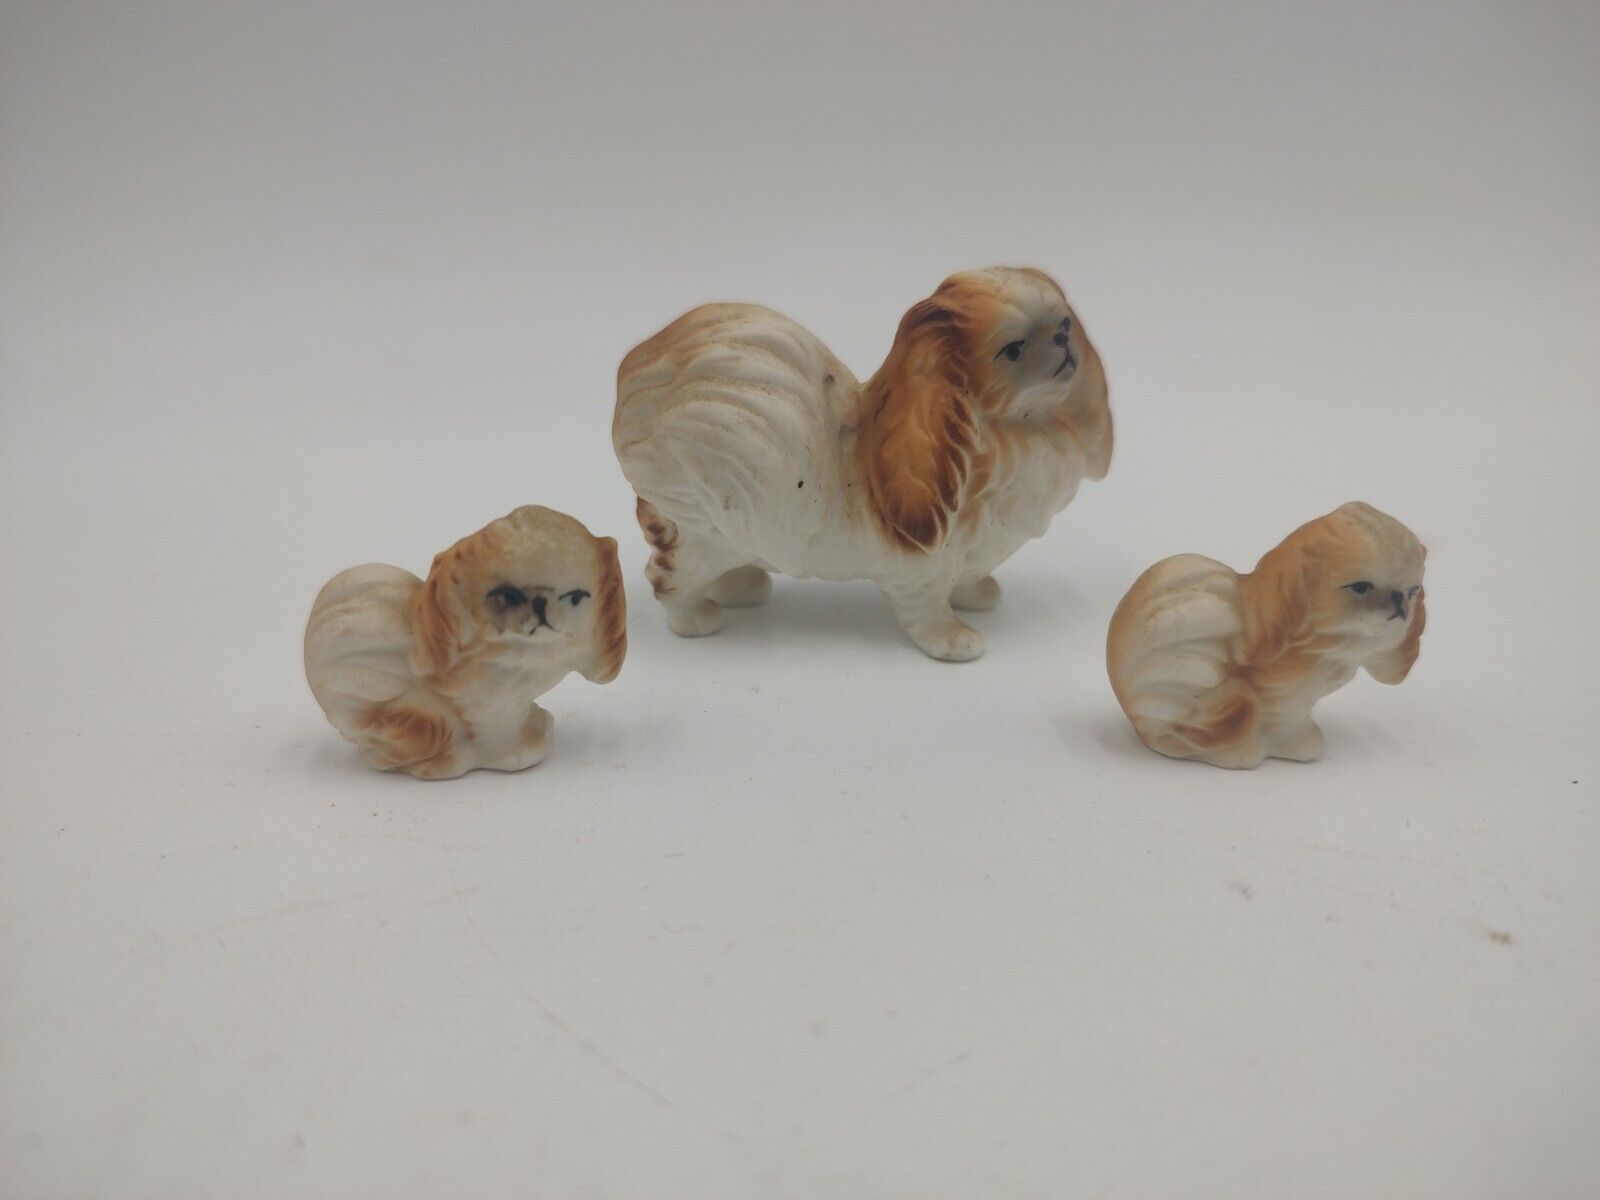 3 Porcelain Pekingese Dog Figurines Mom And Puppies Vintage White And Tan